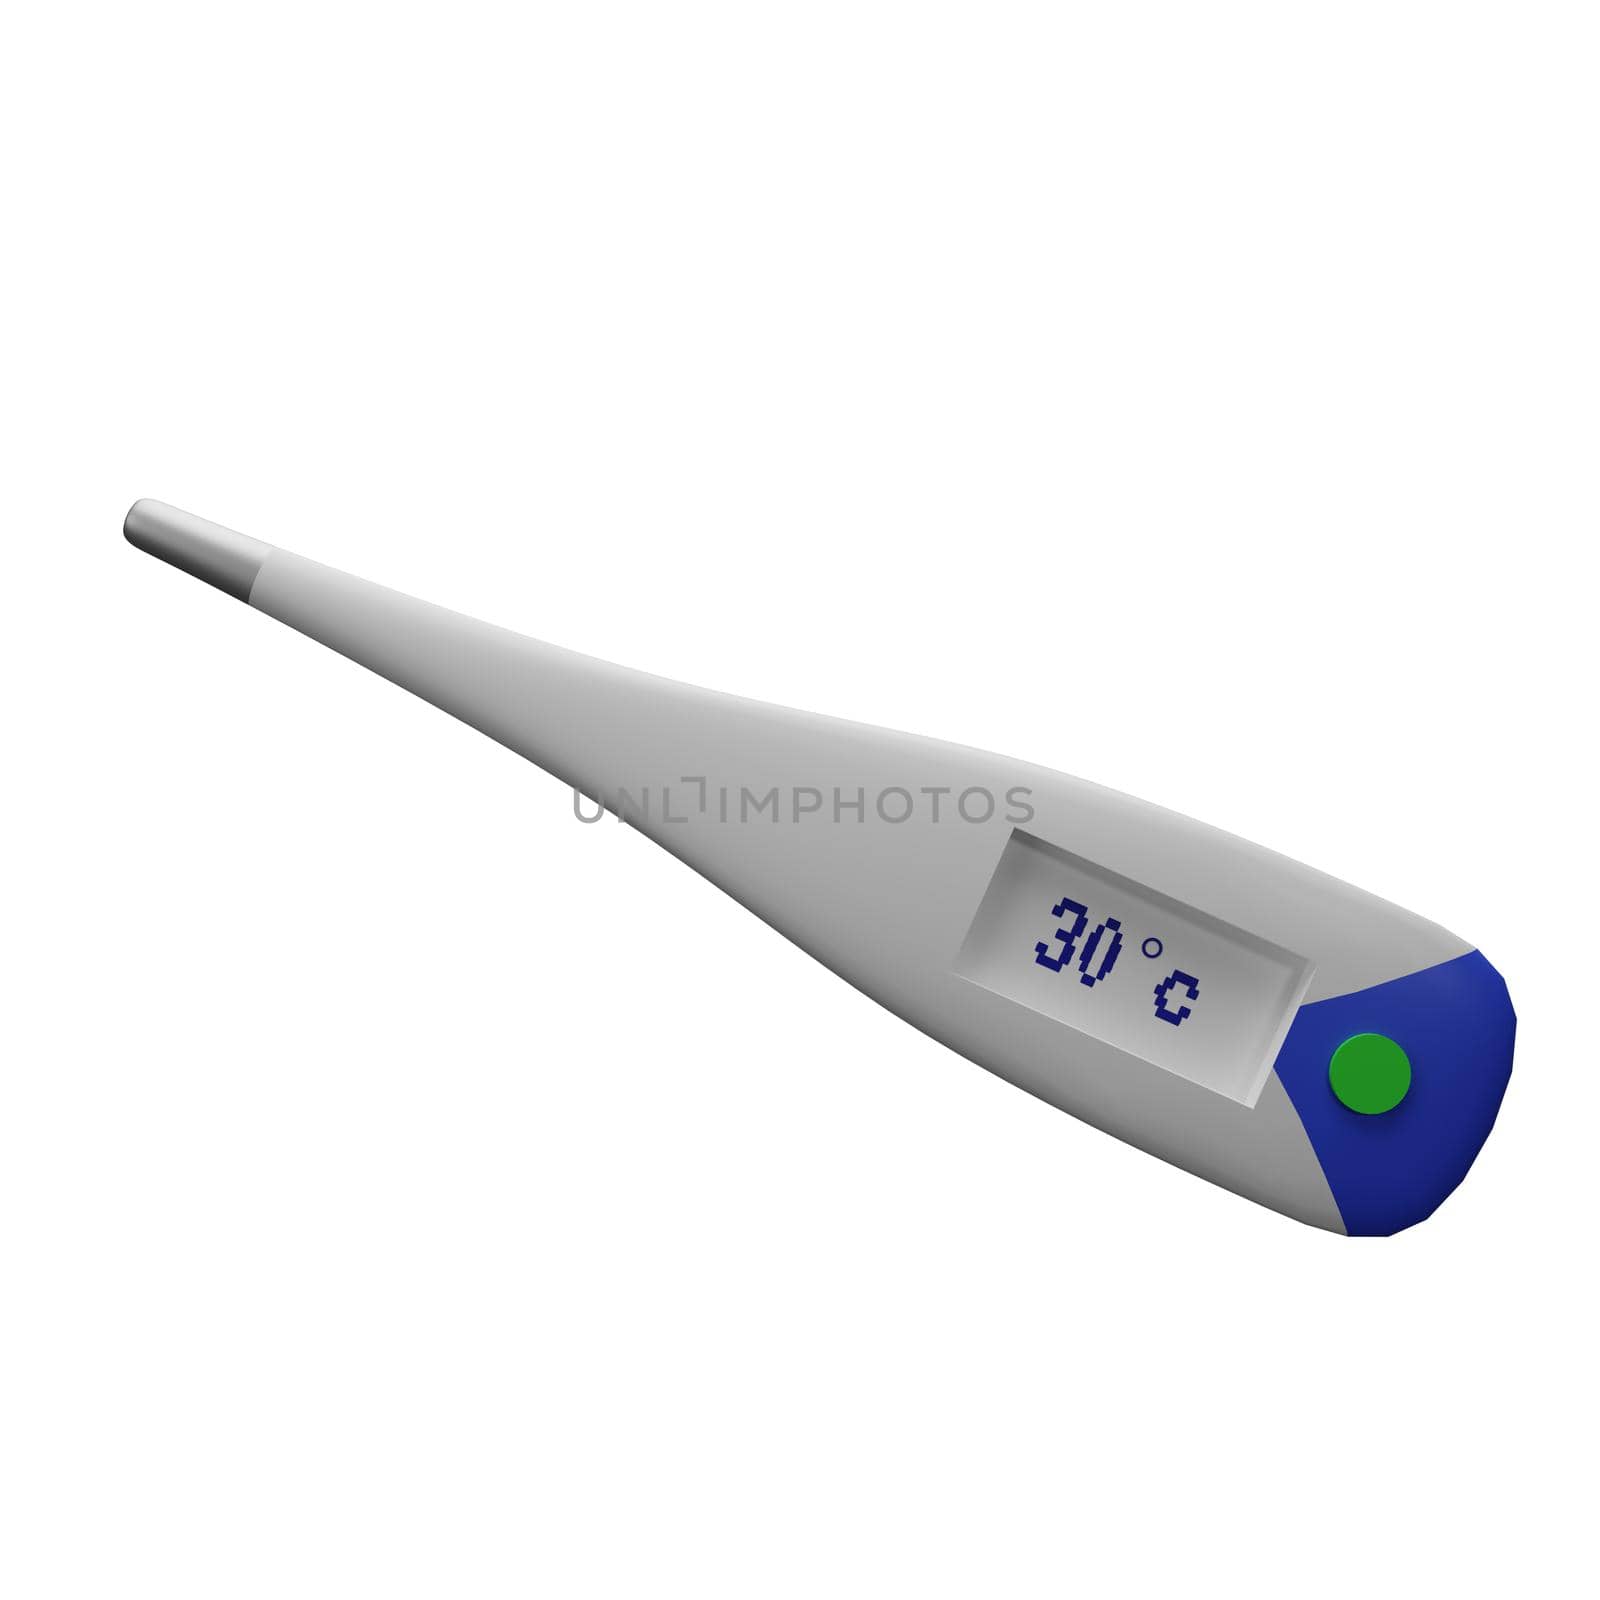 3d rendering of health thermometer icon